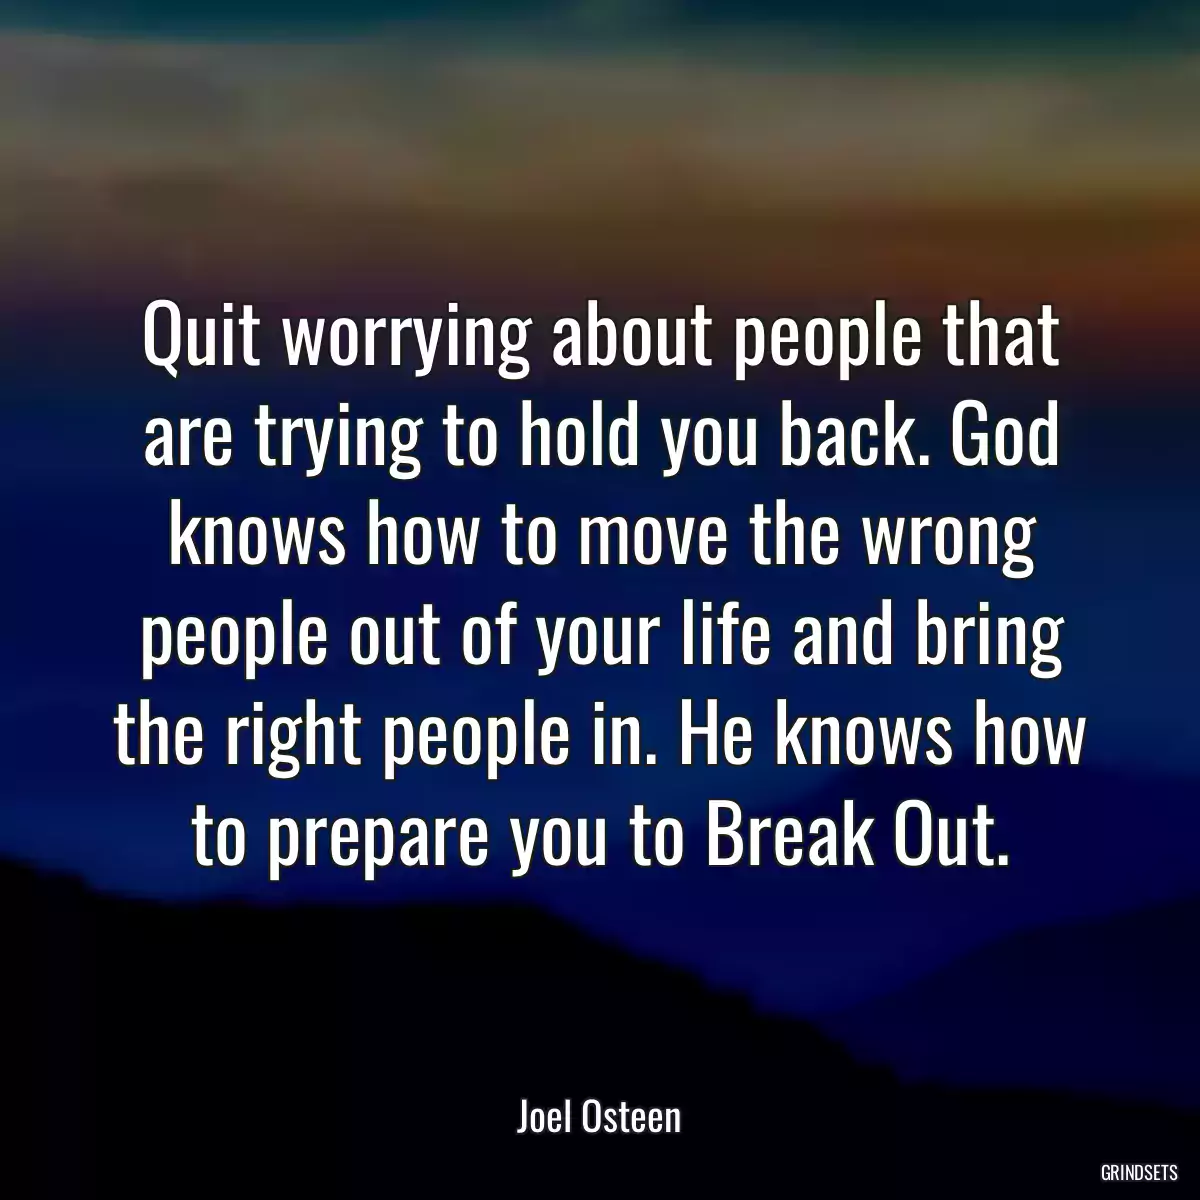 Quit worrying about people that are trying to hold you back. God knows how to move the wrong people out of your life and bring the right people in. He knows how to prepare you to Break Out.